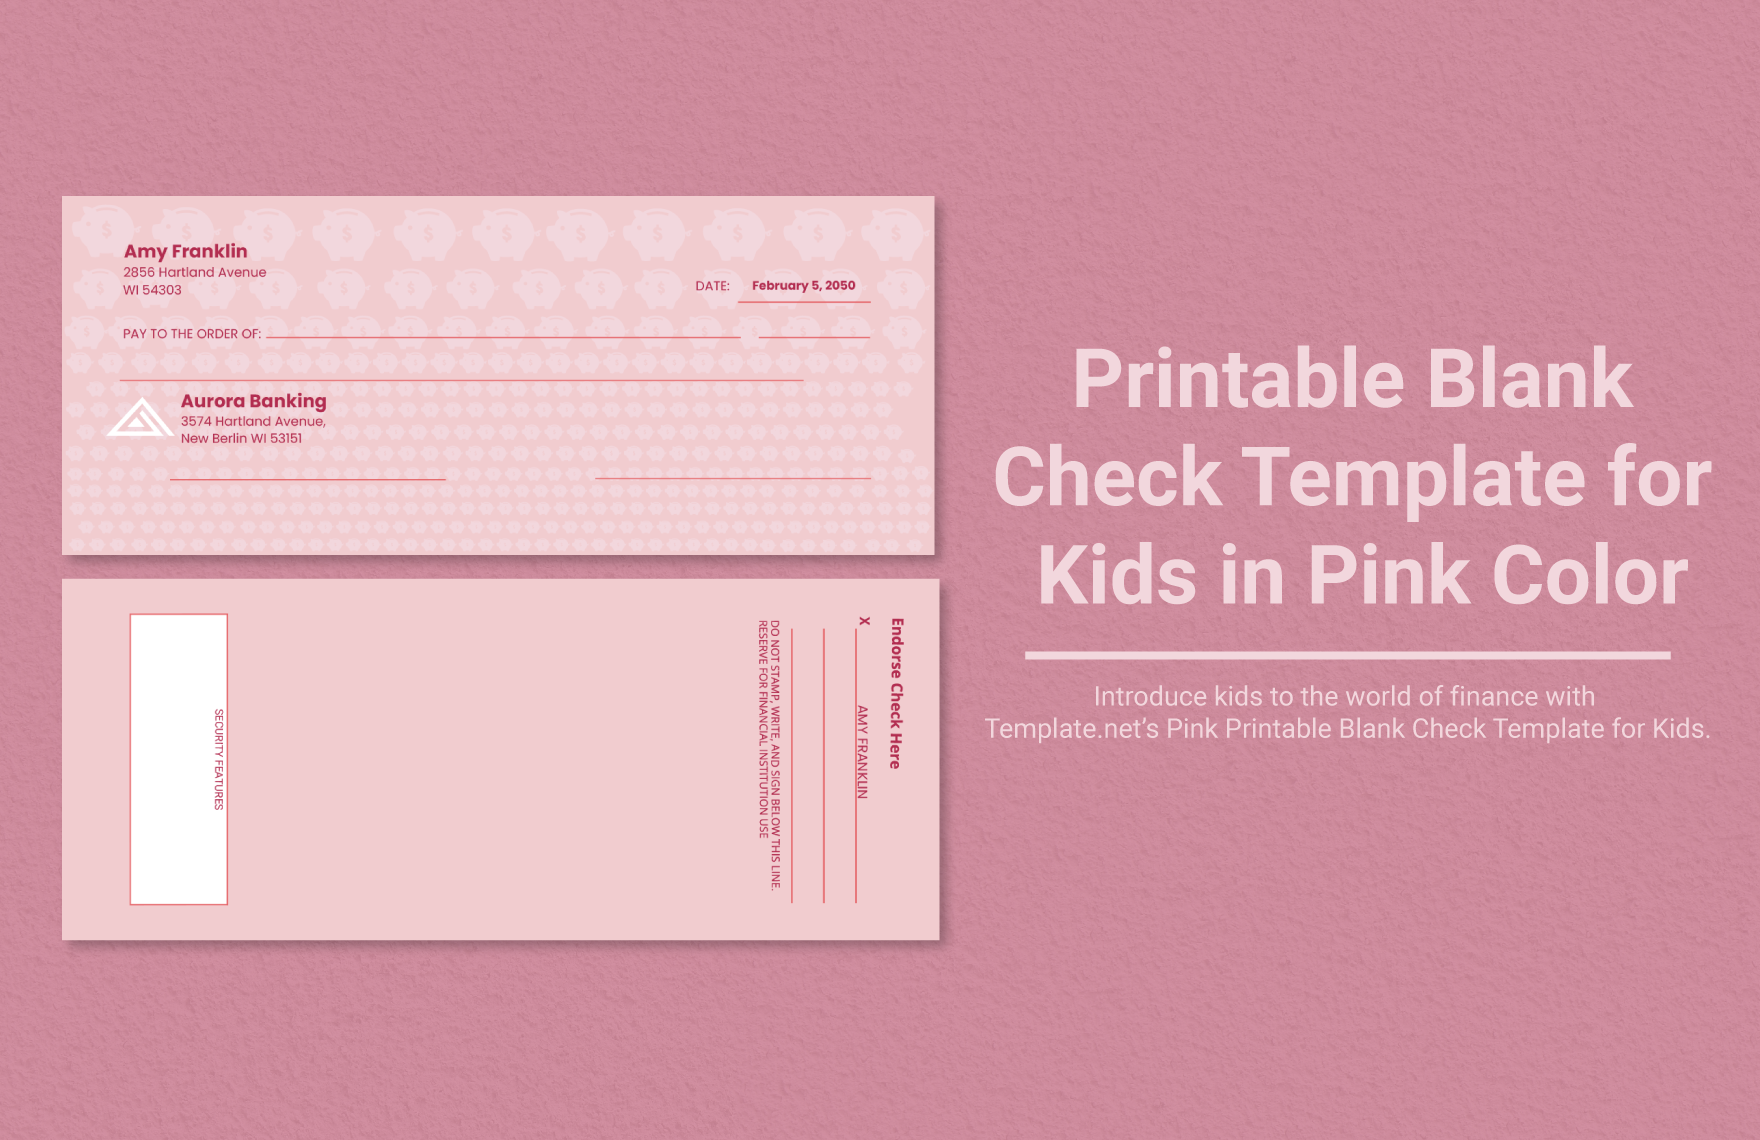 Printable Blank Check Template for Kids in Pink Color in Word, Illustrator, PSD